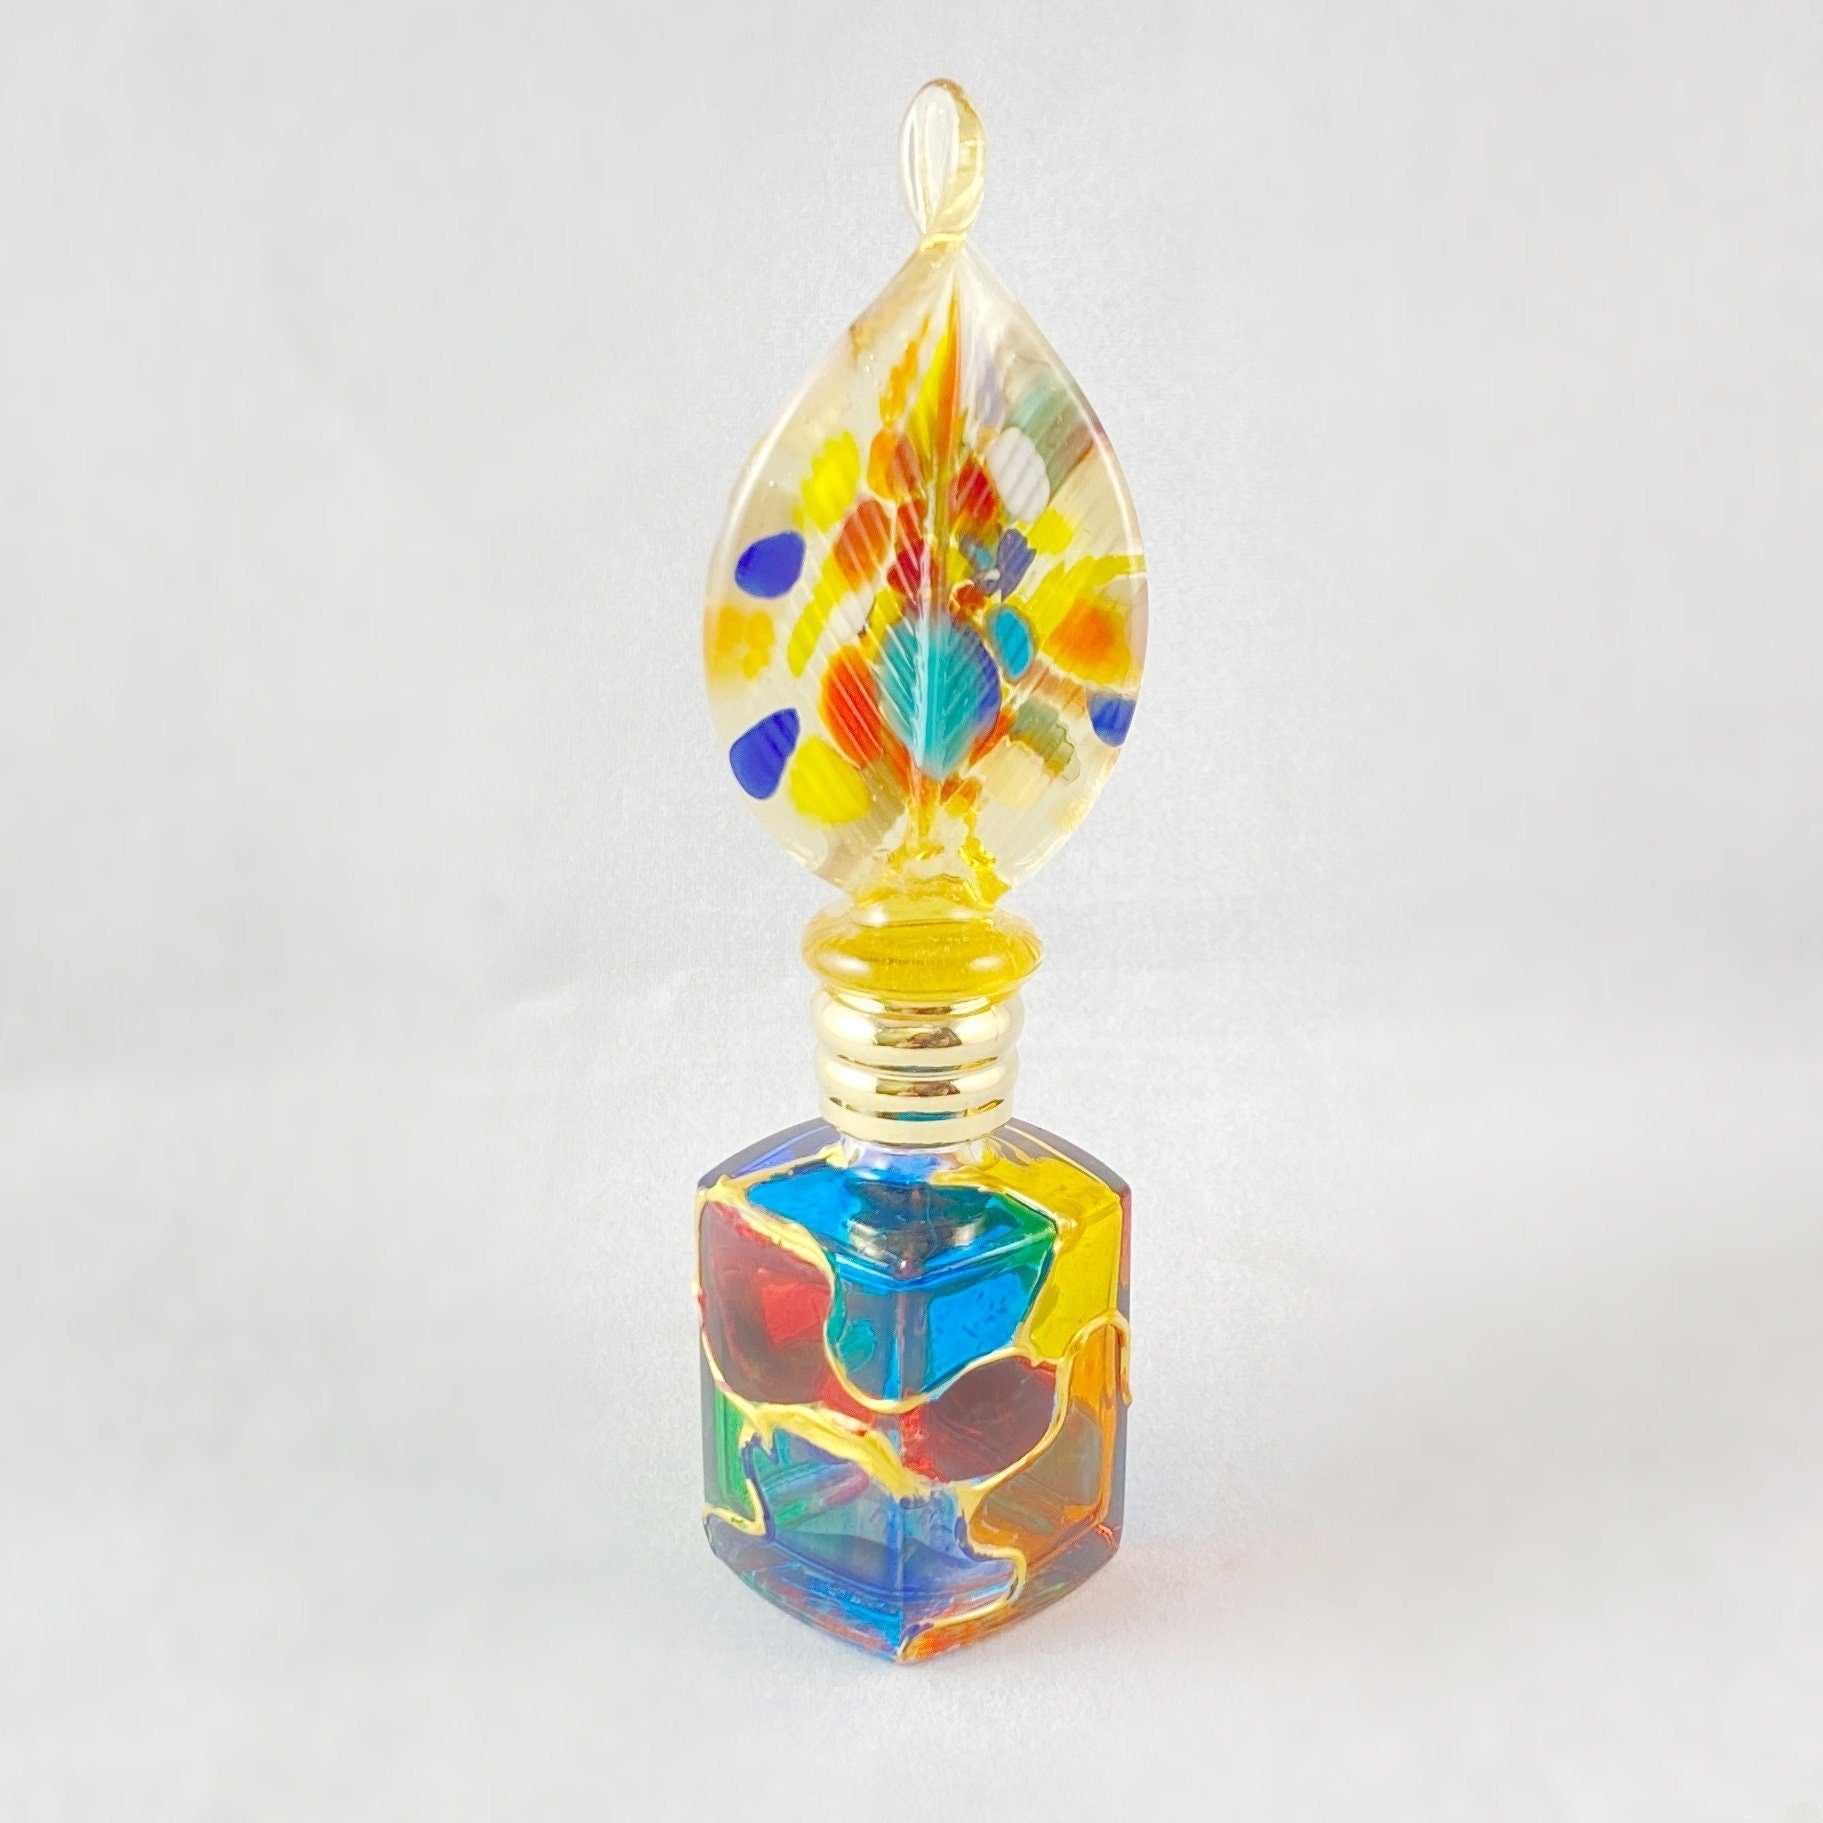 Feather Top Venetian Glass Perfume Bottle - Handmade in Italy, Colorful Murano Glass